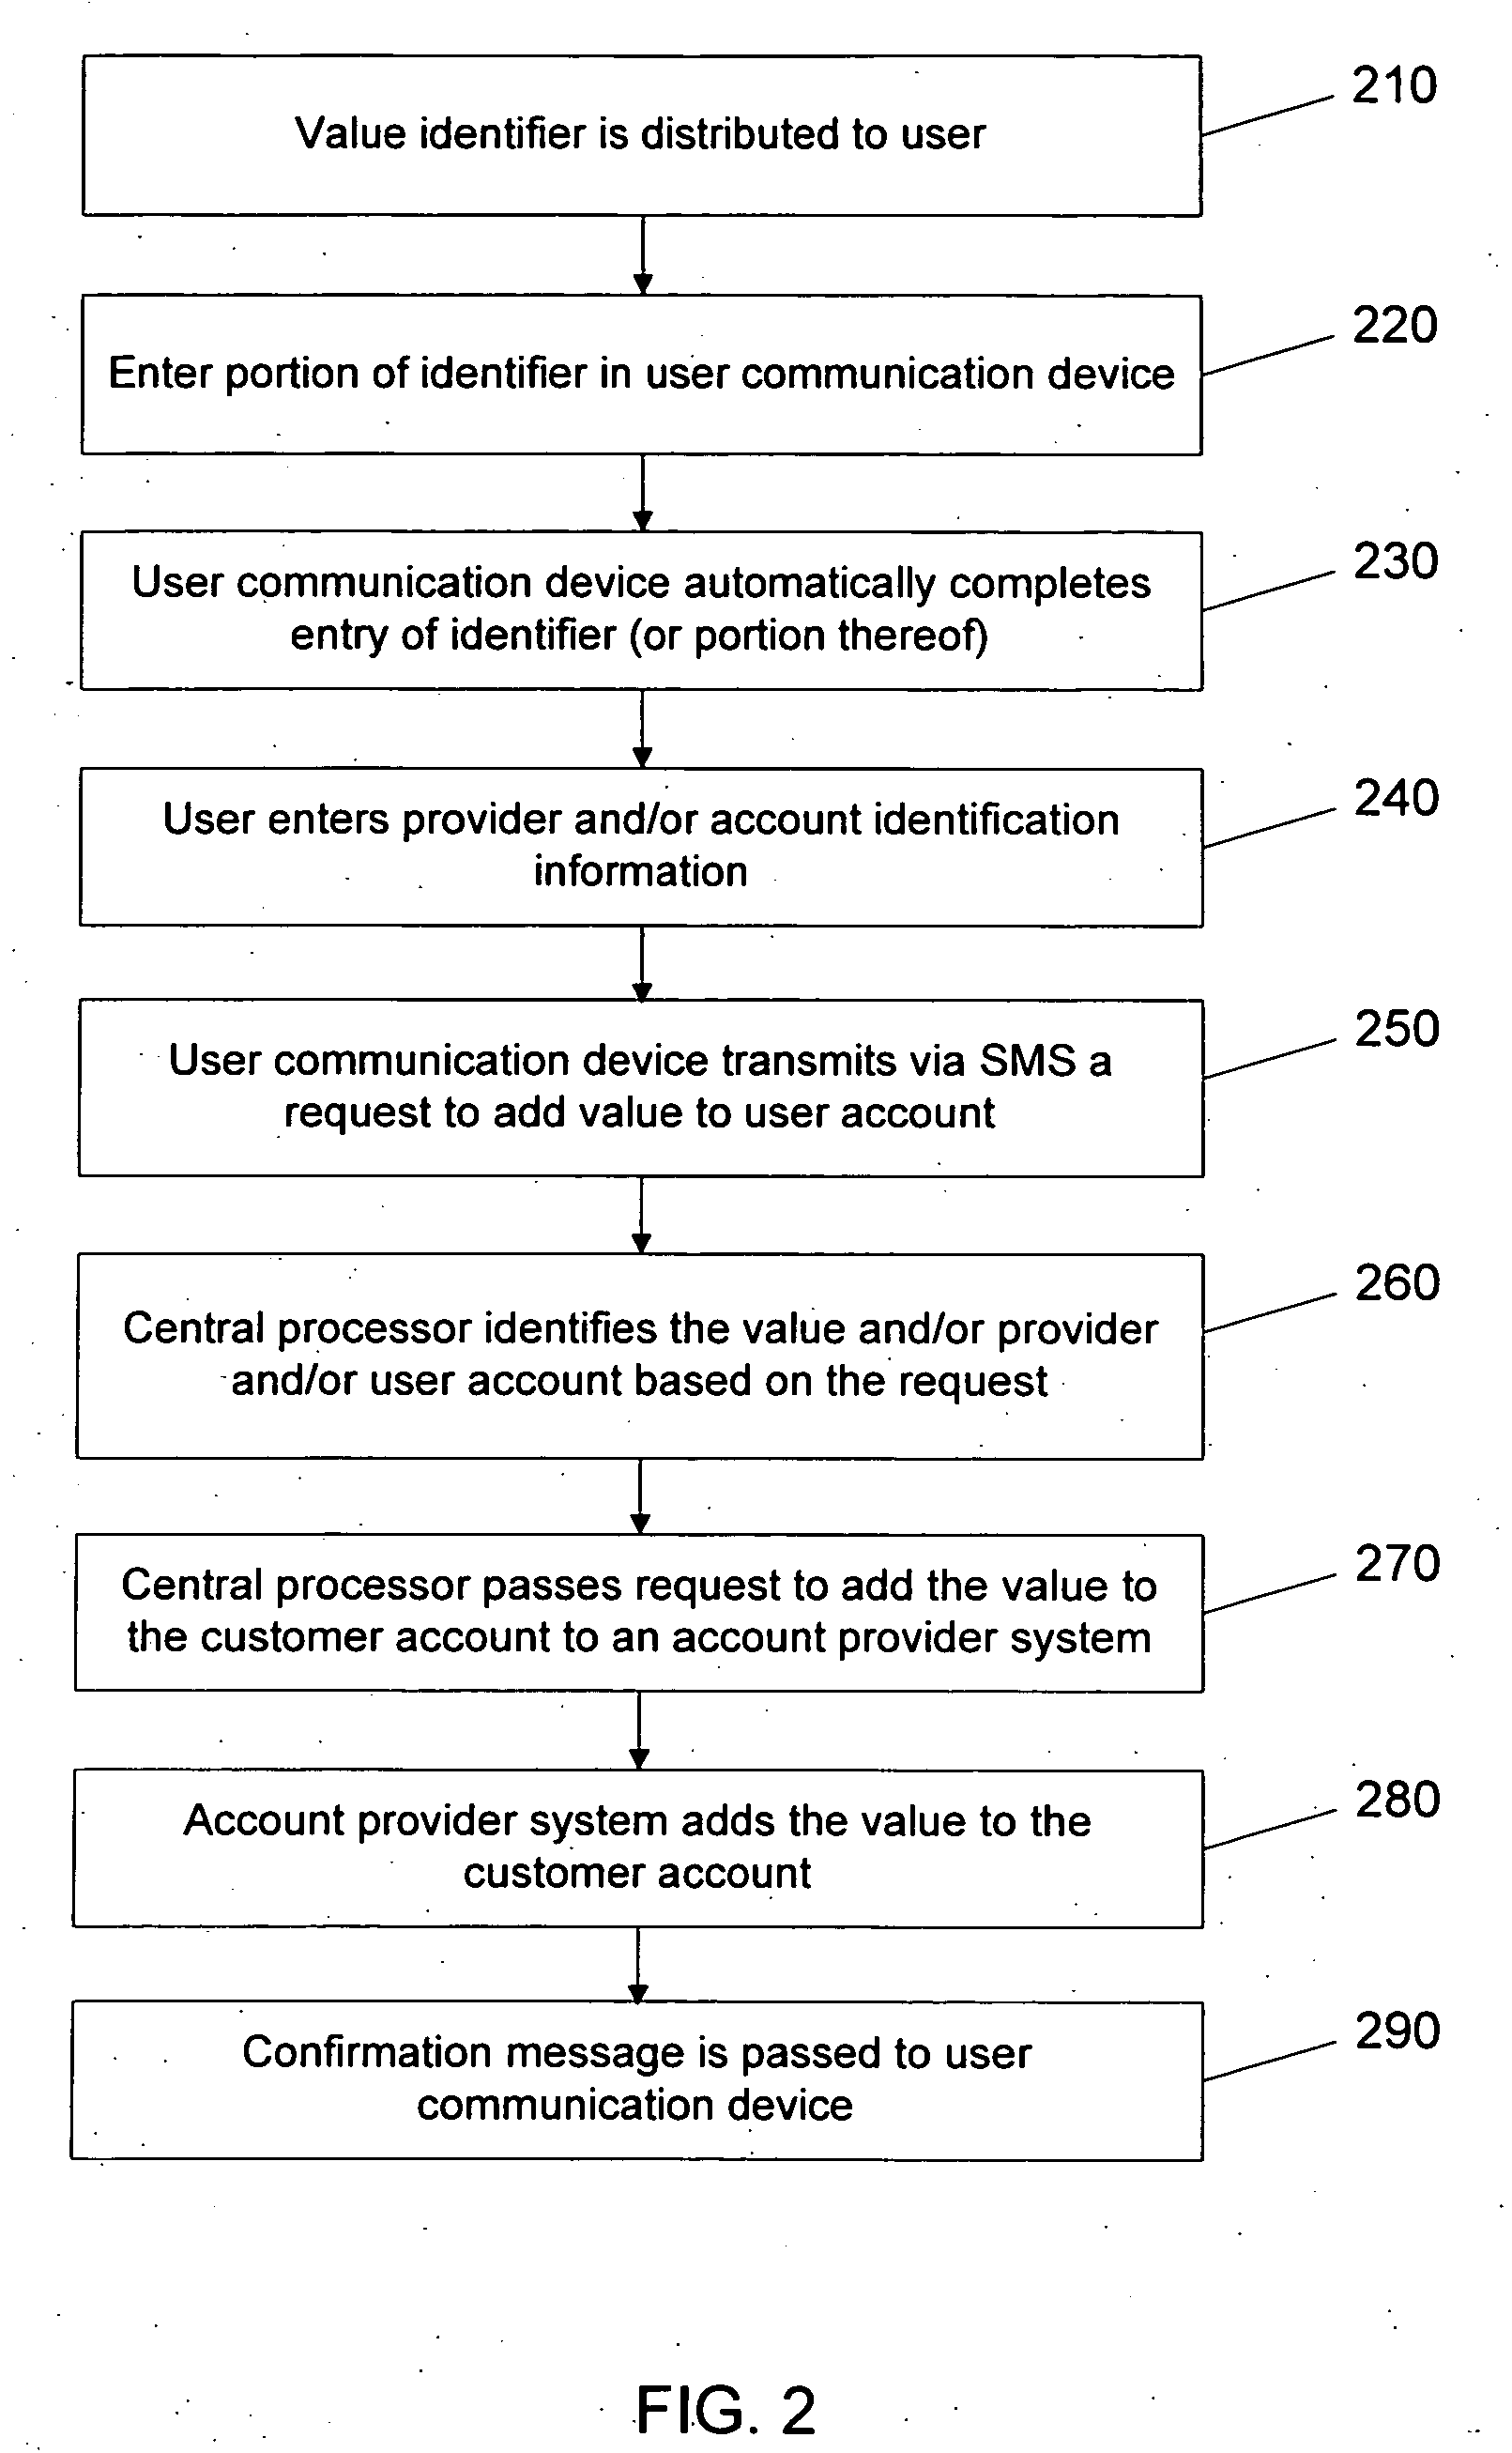 Delivery of value identifiers using short message service (SMS)